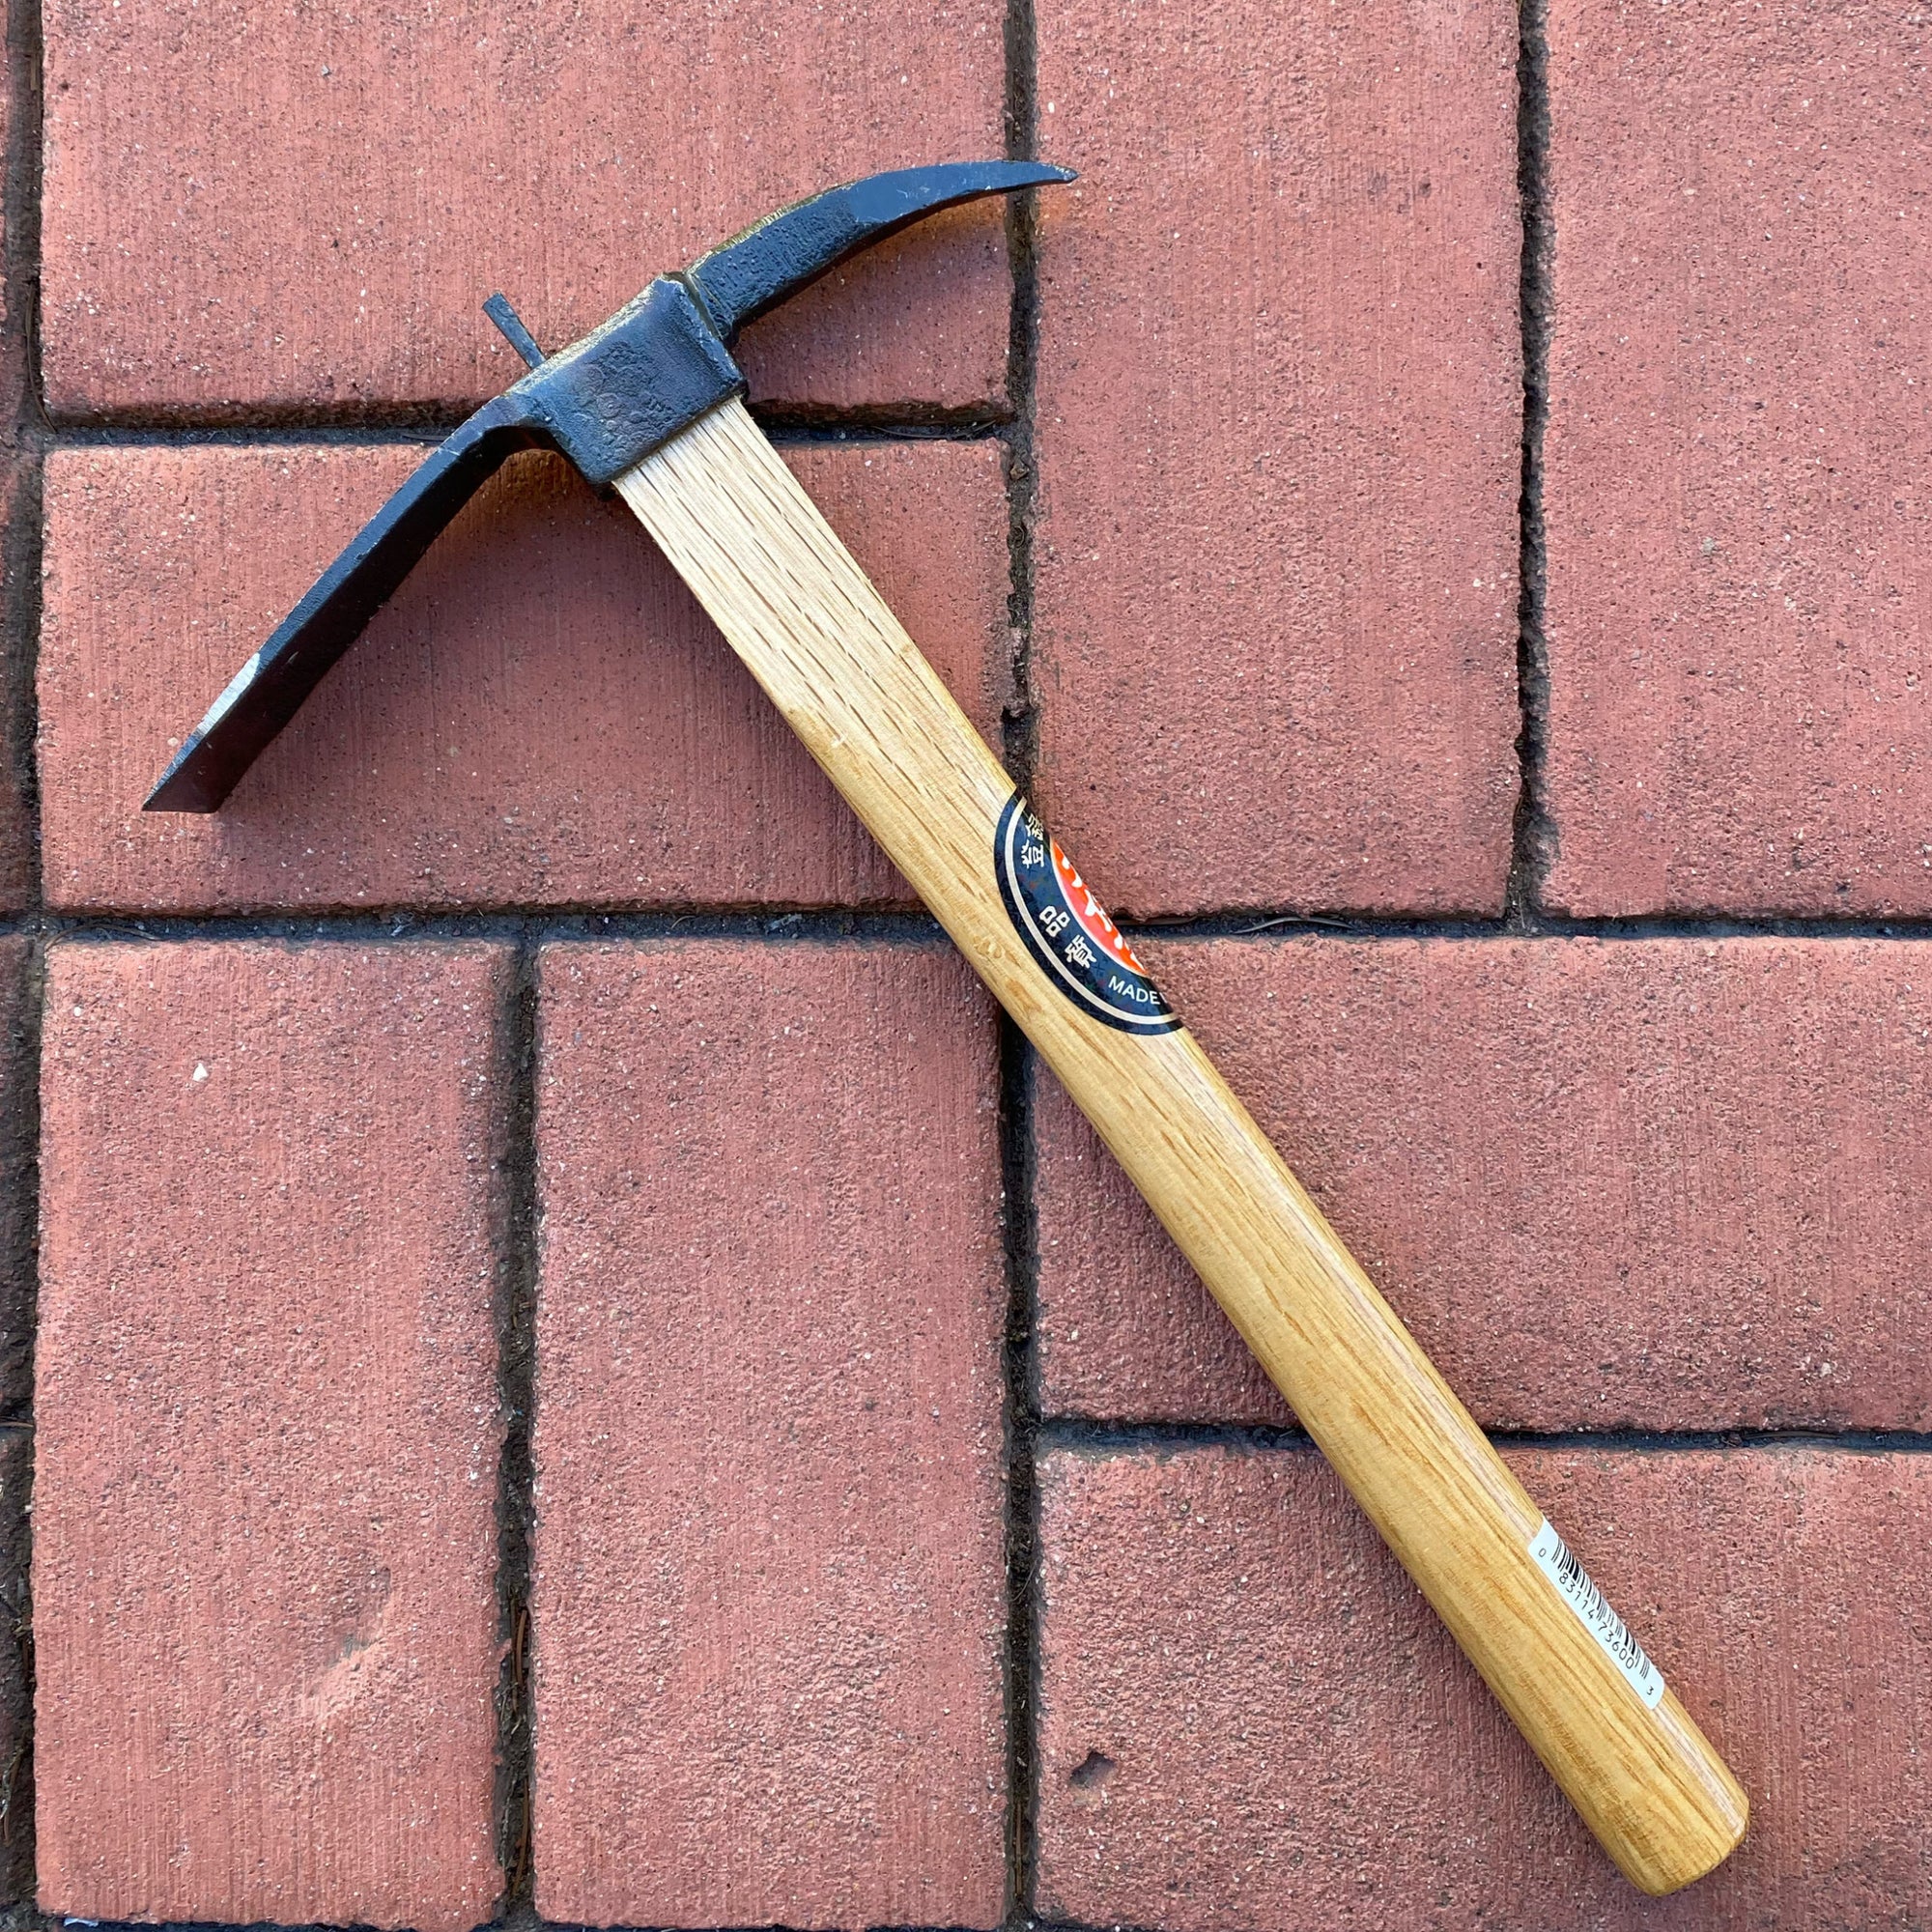 A tool with a black metal pick and a wooden handle. It is sitting on top of red bricks.